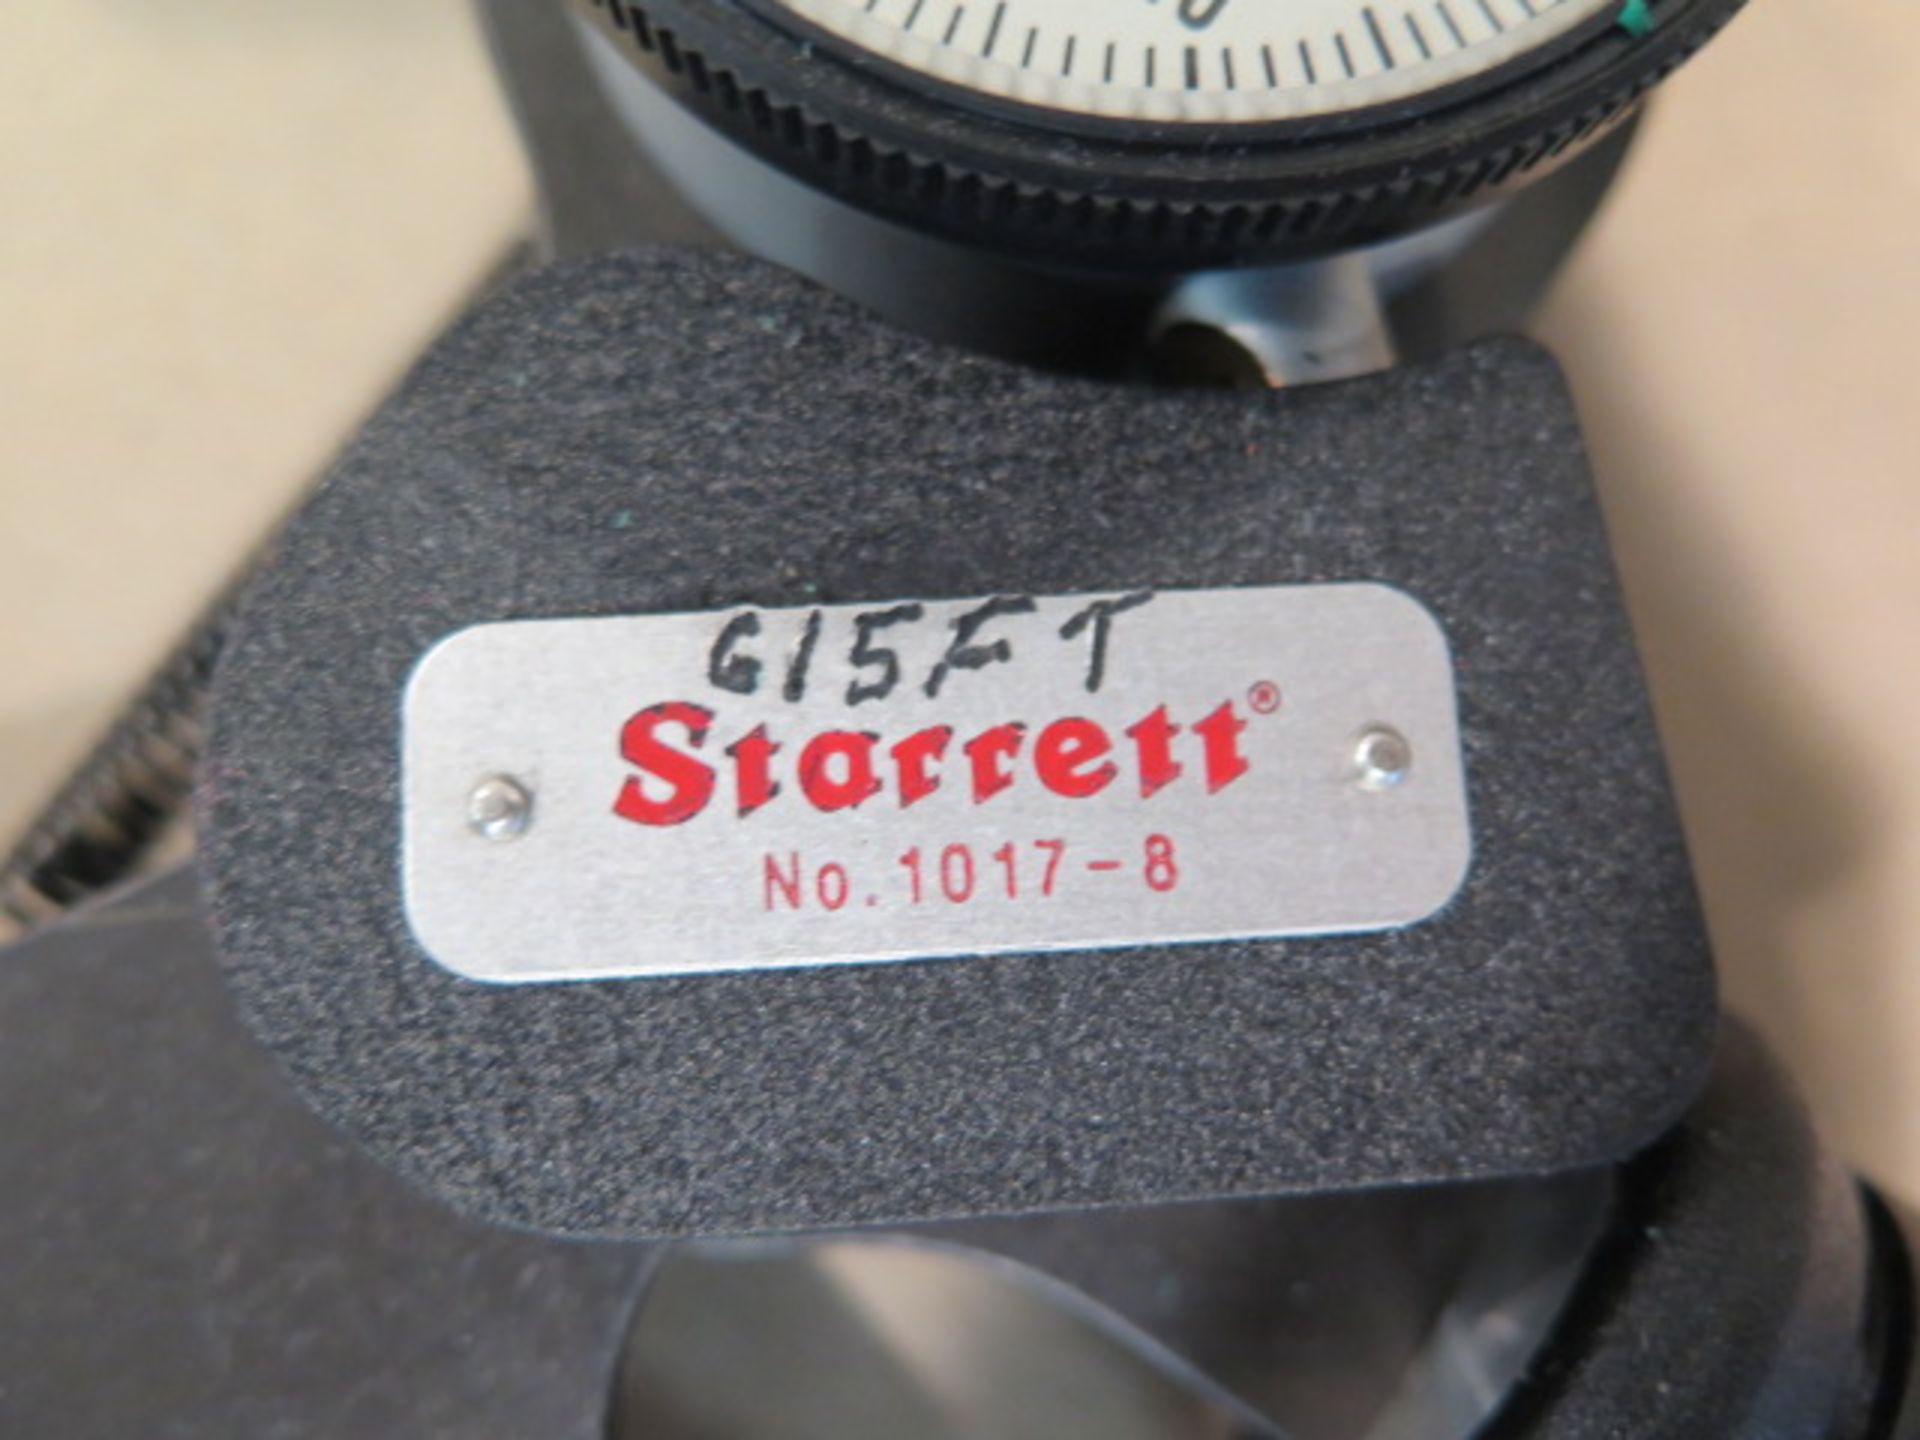 Starrett 2" Dial Snap Gage (SOLD AS-IS - NO WARRANTY) - Image 4 of 4